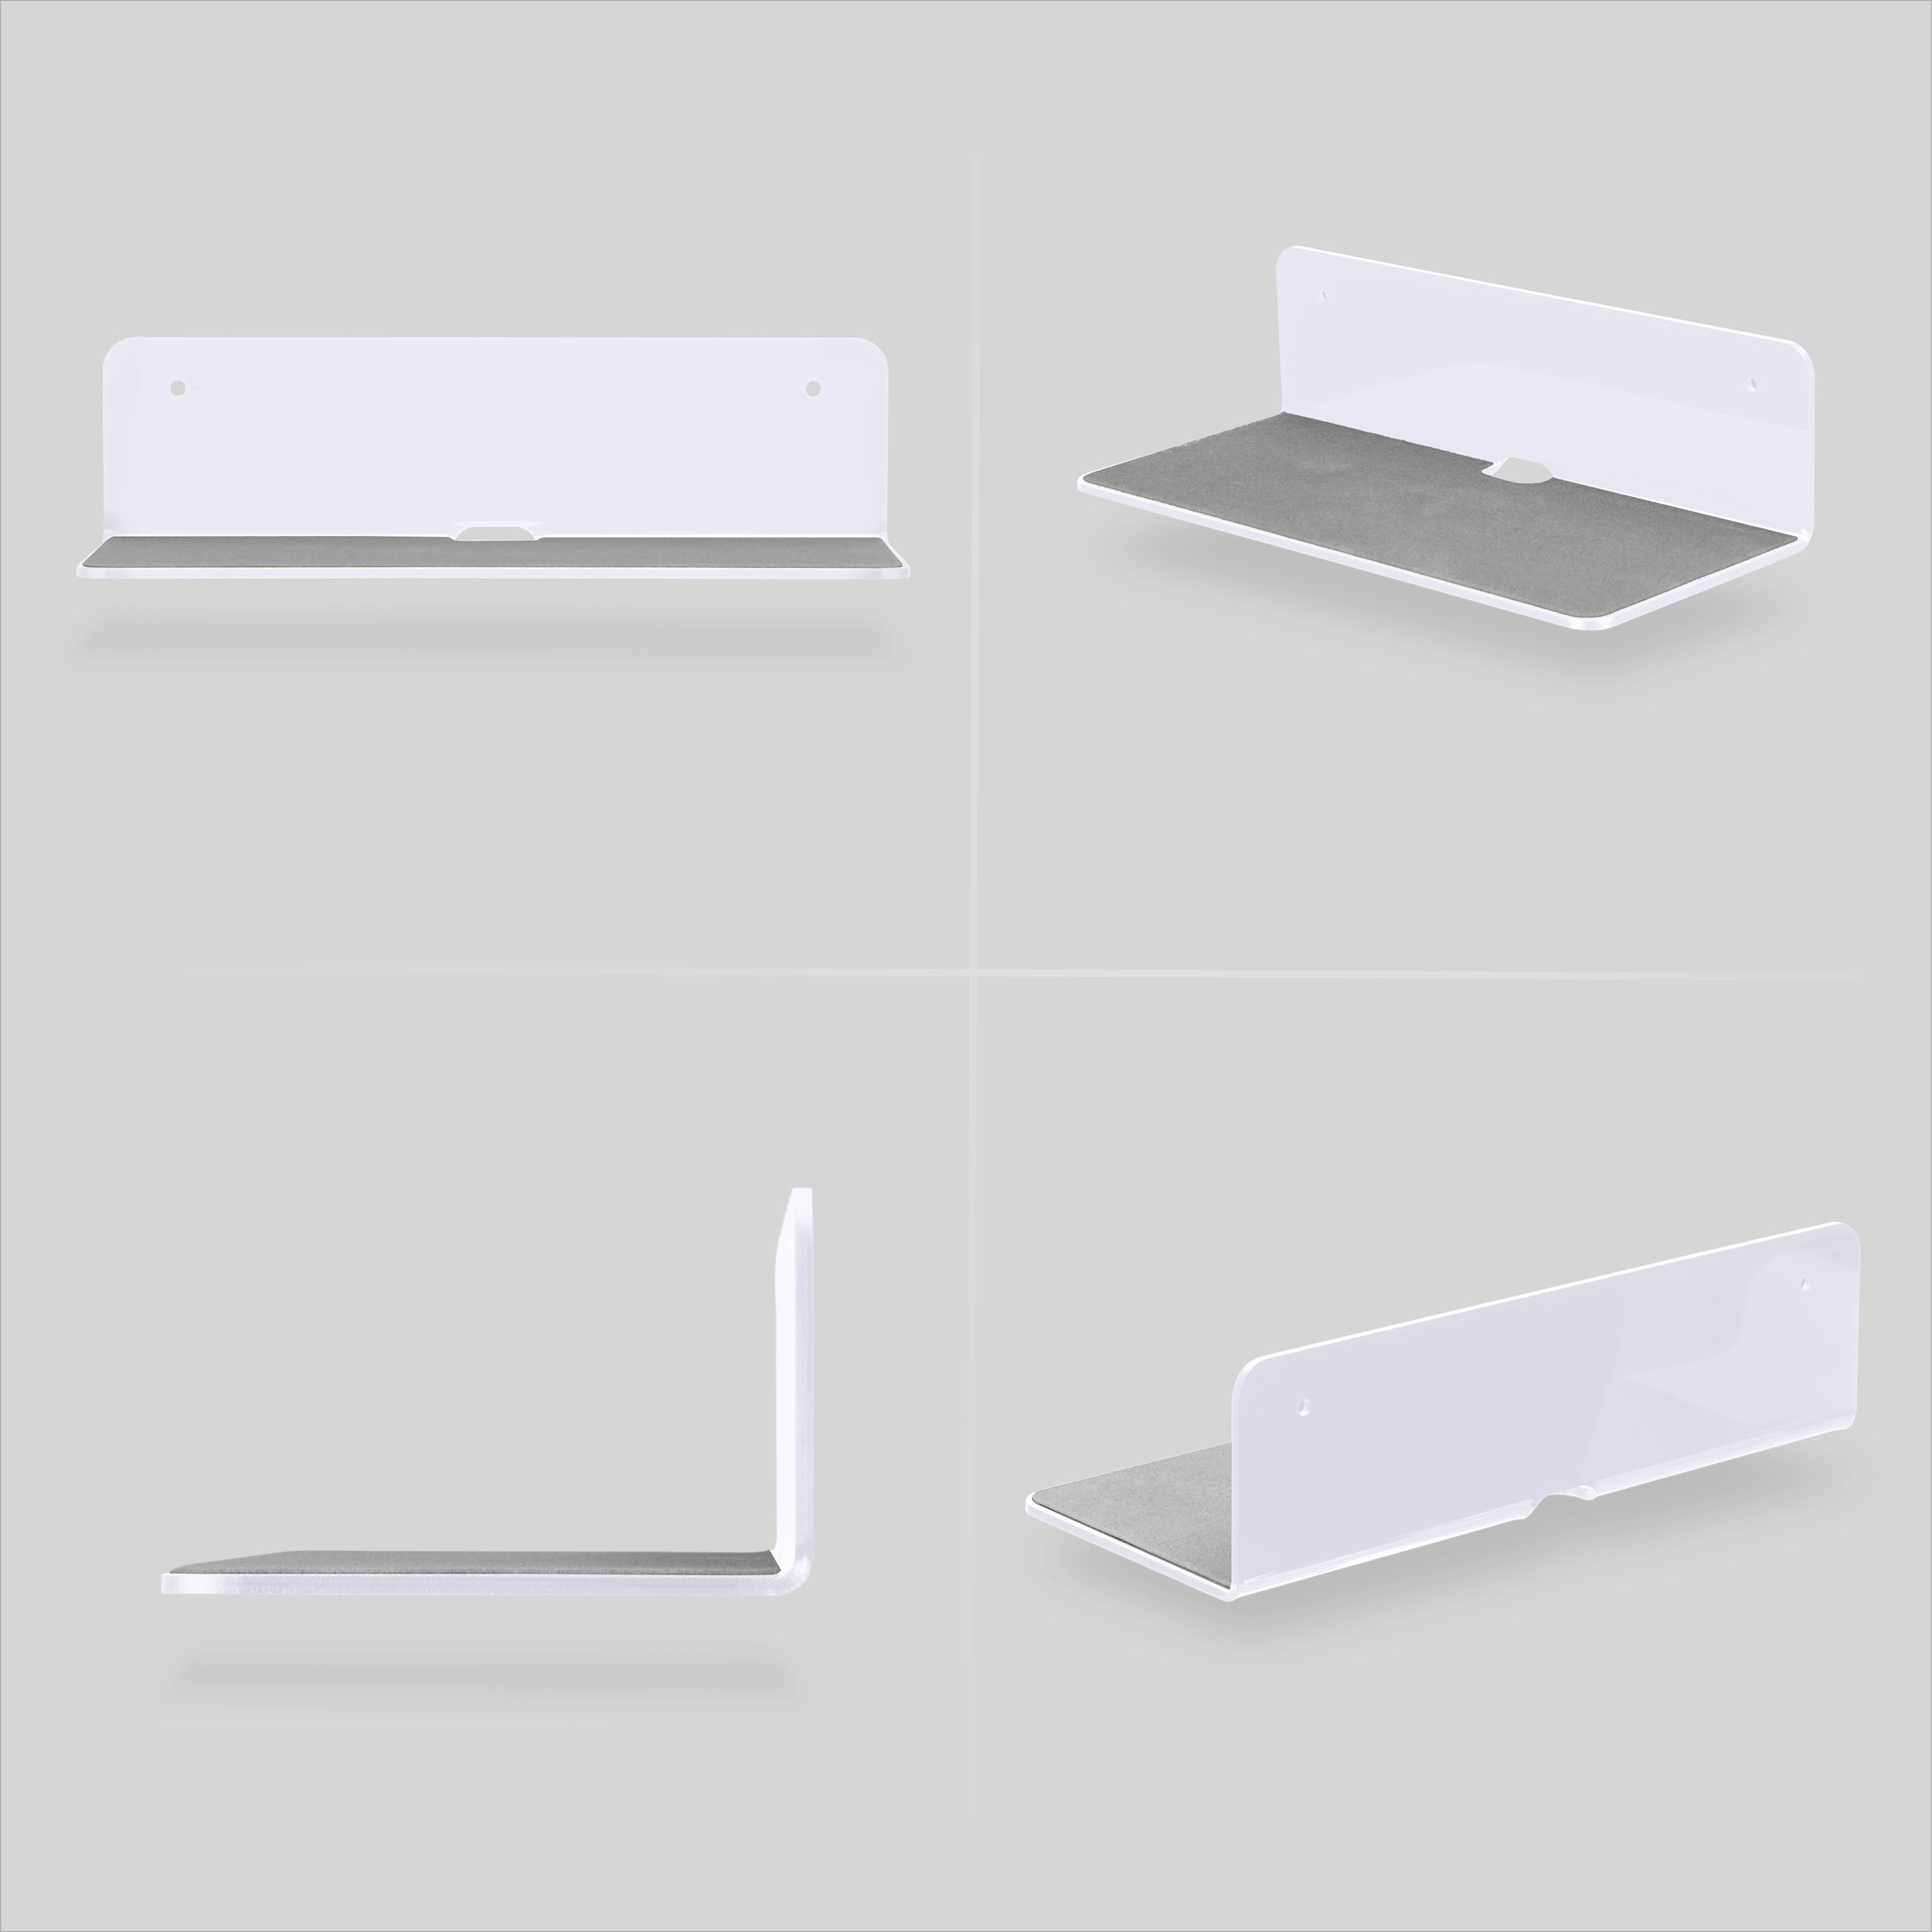 4 acrylic floating shelves, wall small shelves without nails, self